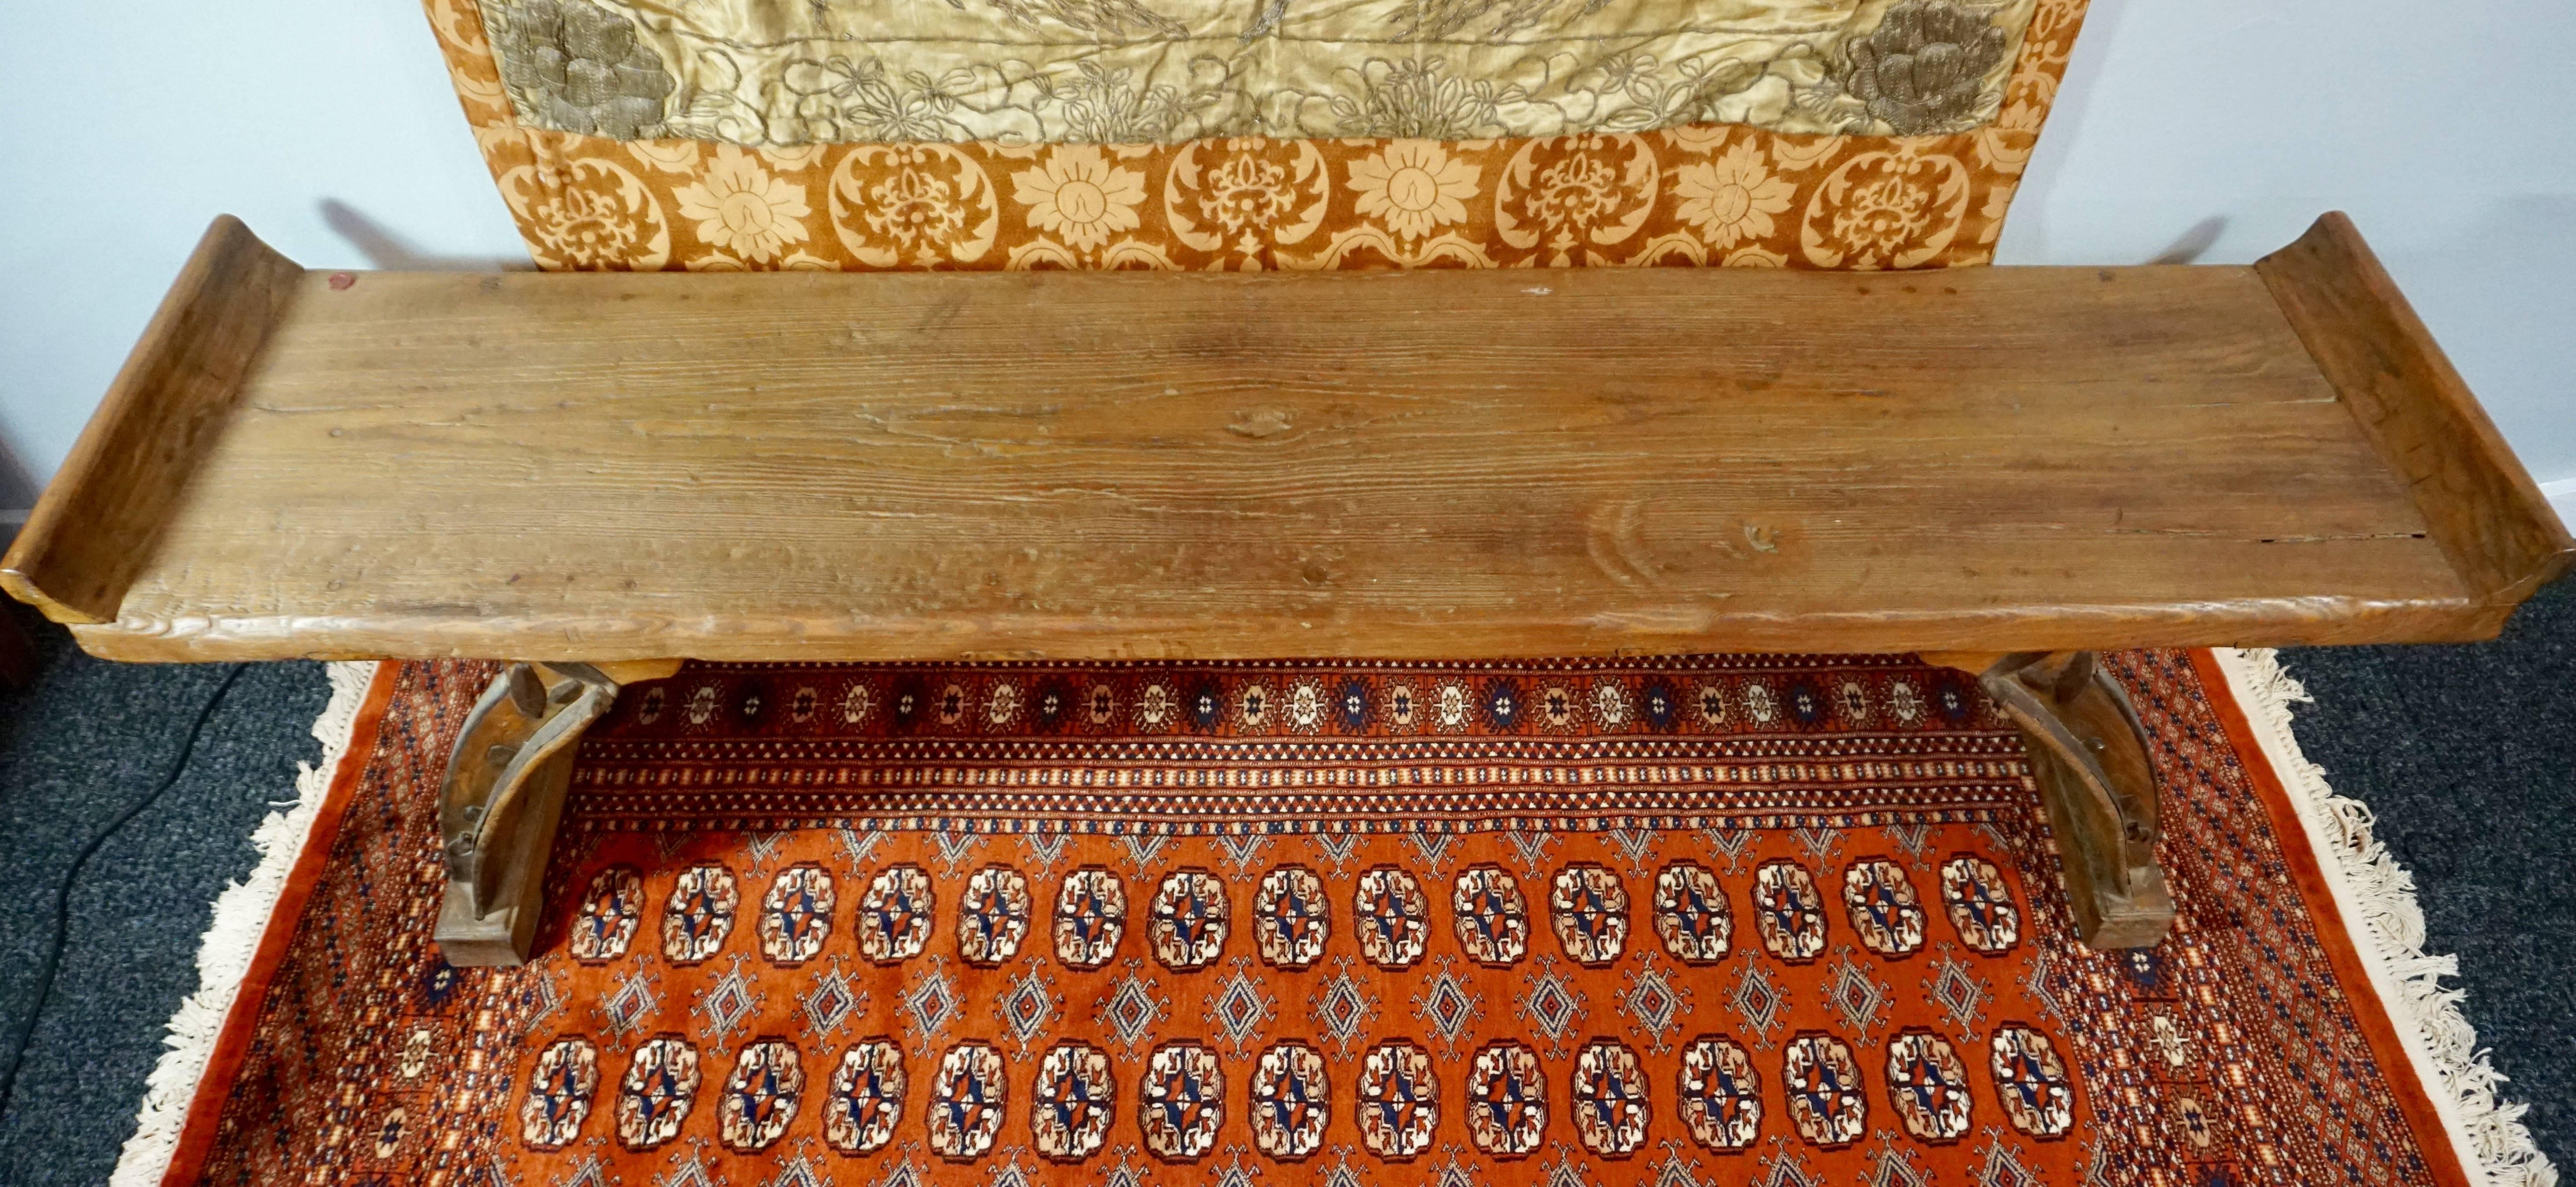 Late 18th Century 18th-19th Century Chinese Qing Dynasty Elmwood Alter Table Bench